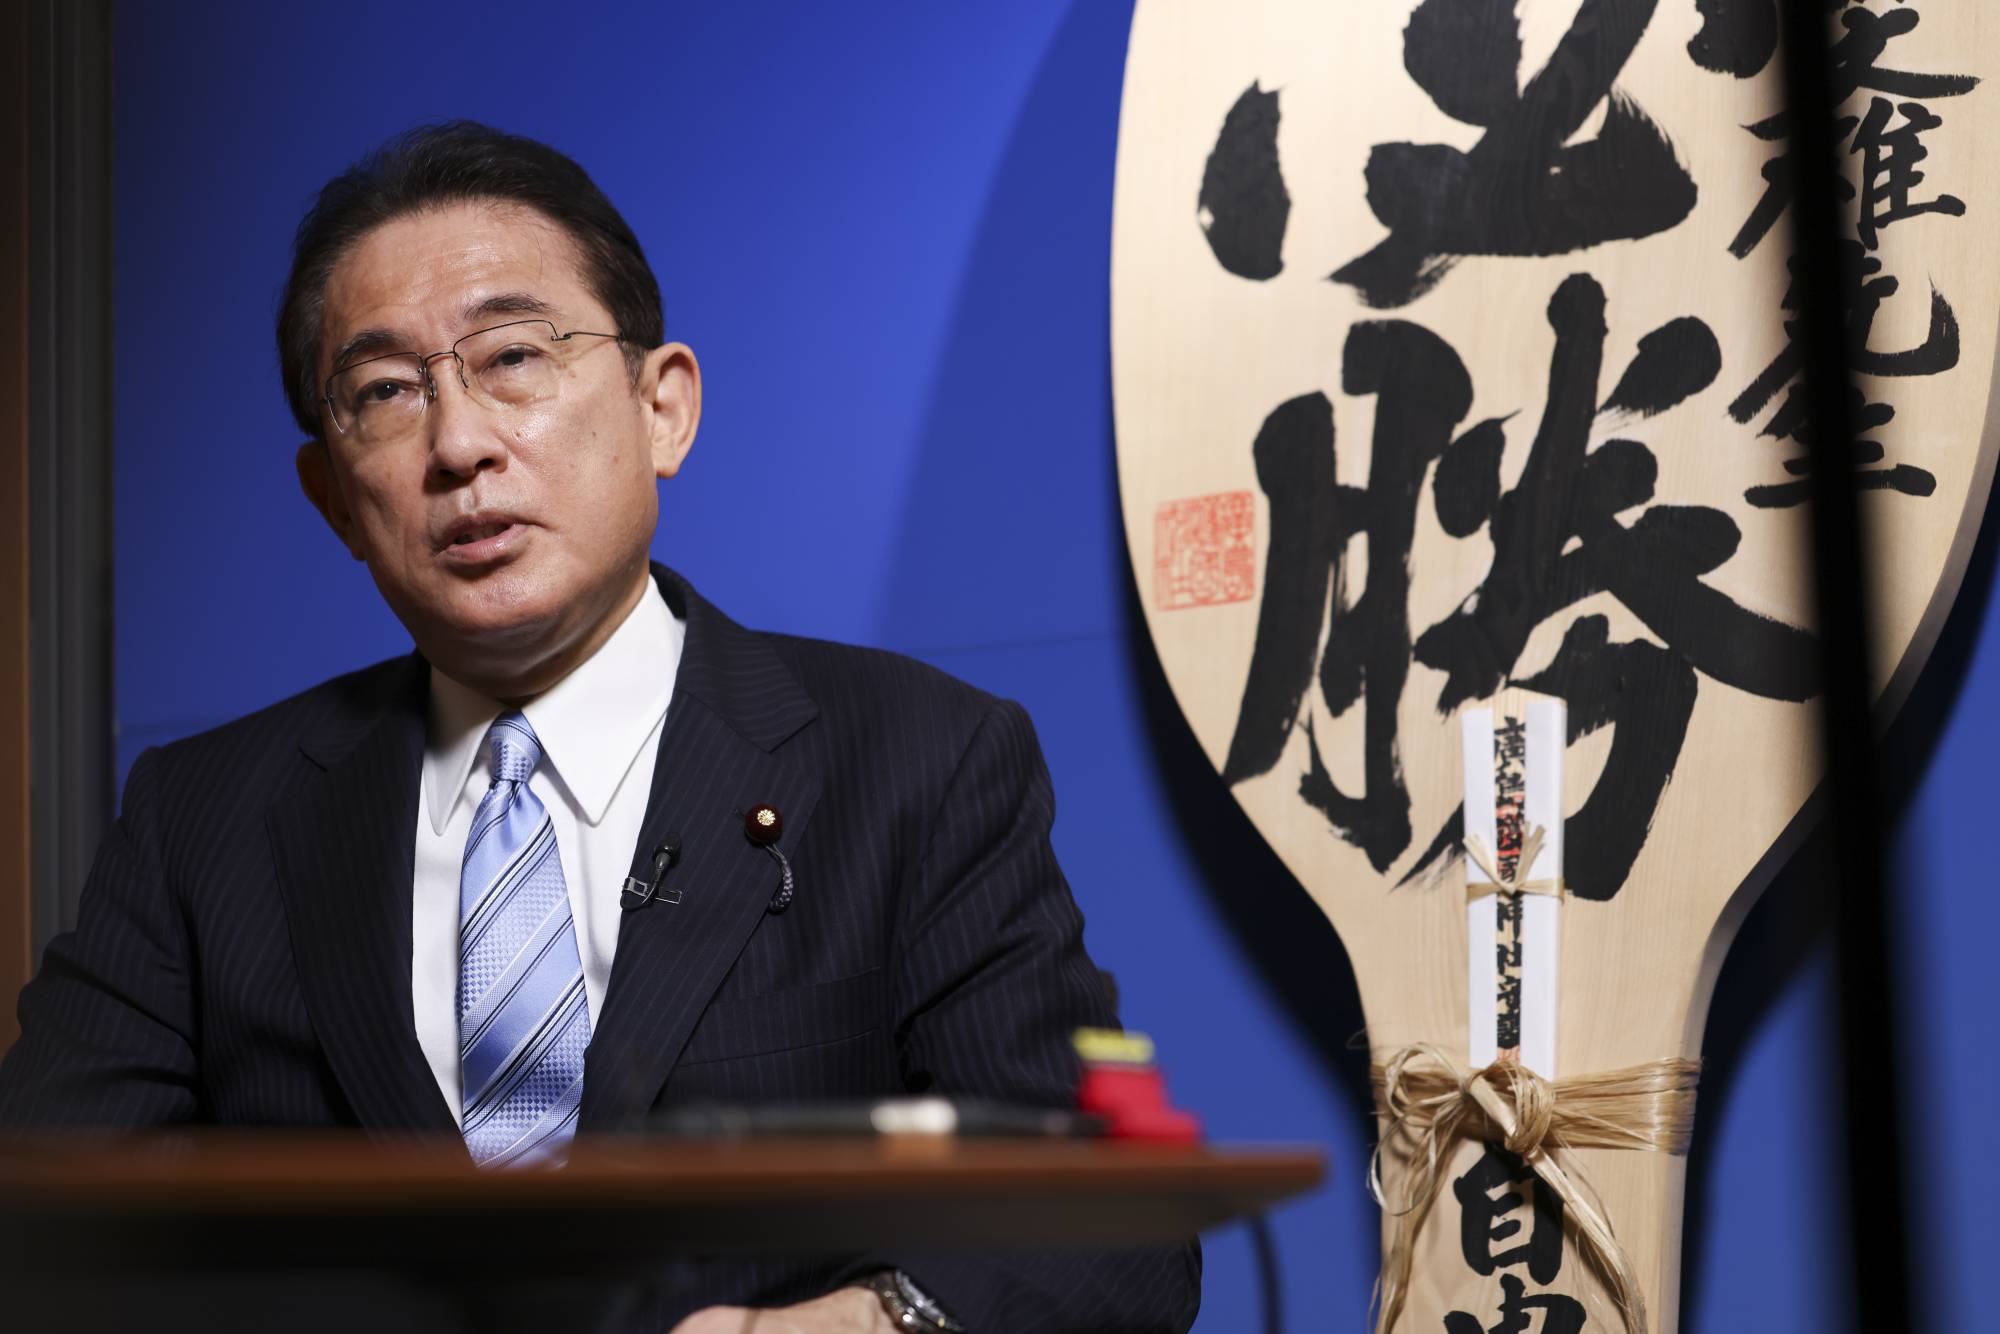 Former Foreign Minister Fumio Kishida, who was elected Liberal Democratic president Wednesday, speaks during an interview at his office in Tokyo on Sept. 3. | BLOOMBERG